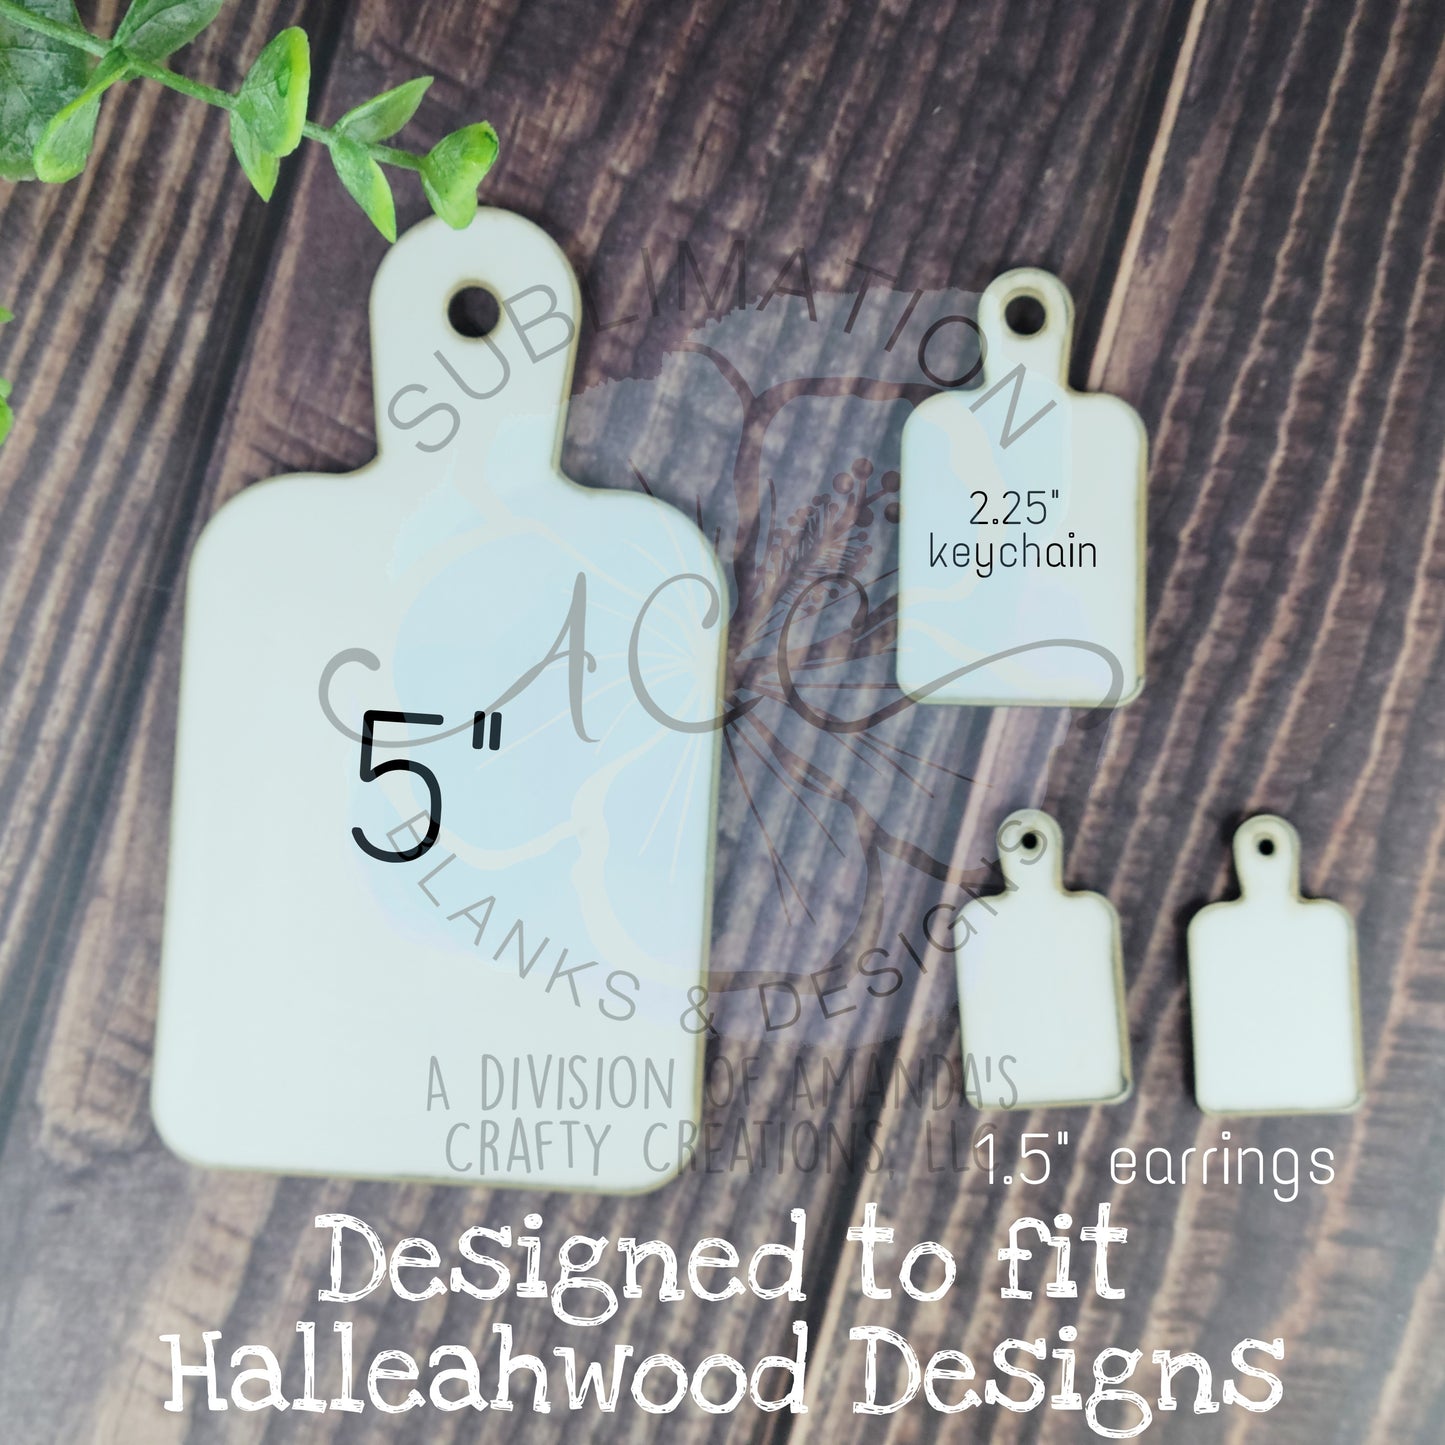 Sublimation CUTTING BOARD blank shapes, cutting board cutout, Halleahwood designs shape blanks, sublimation mdf blanks, earrings, keychain, cutting board shapes